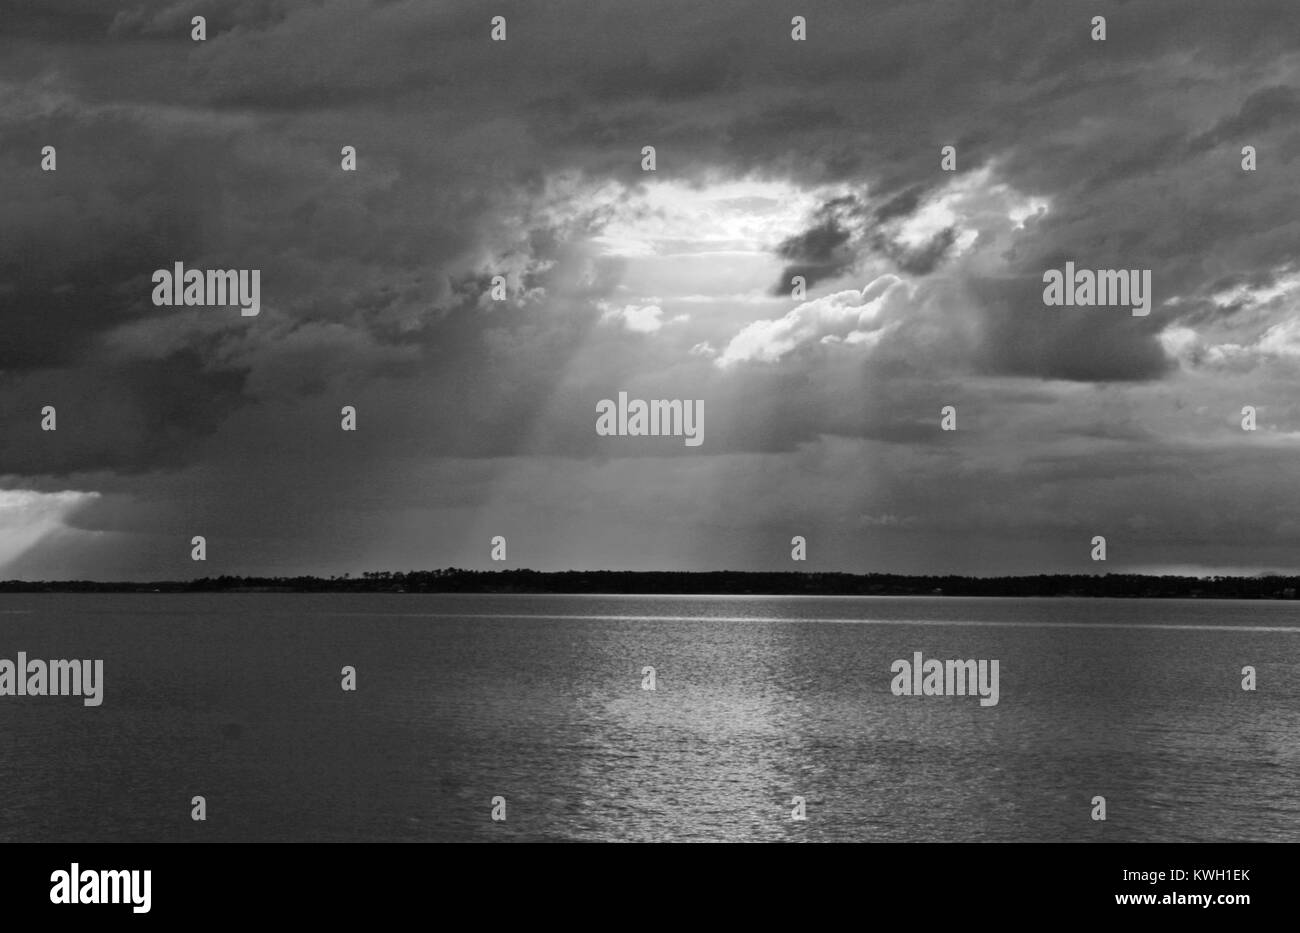 Black & white storm on Bay light shining through a break in clouds Stock Photo